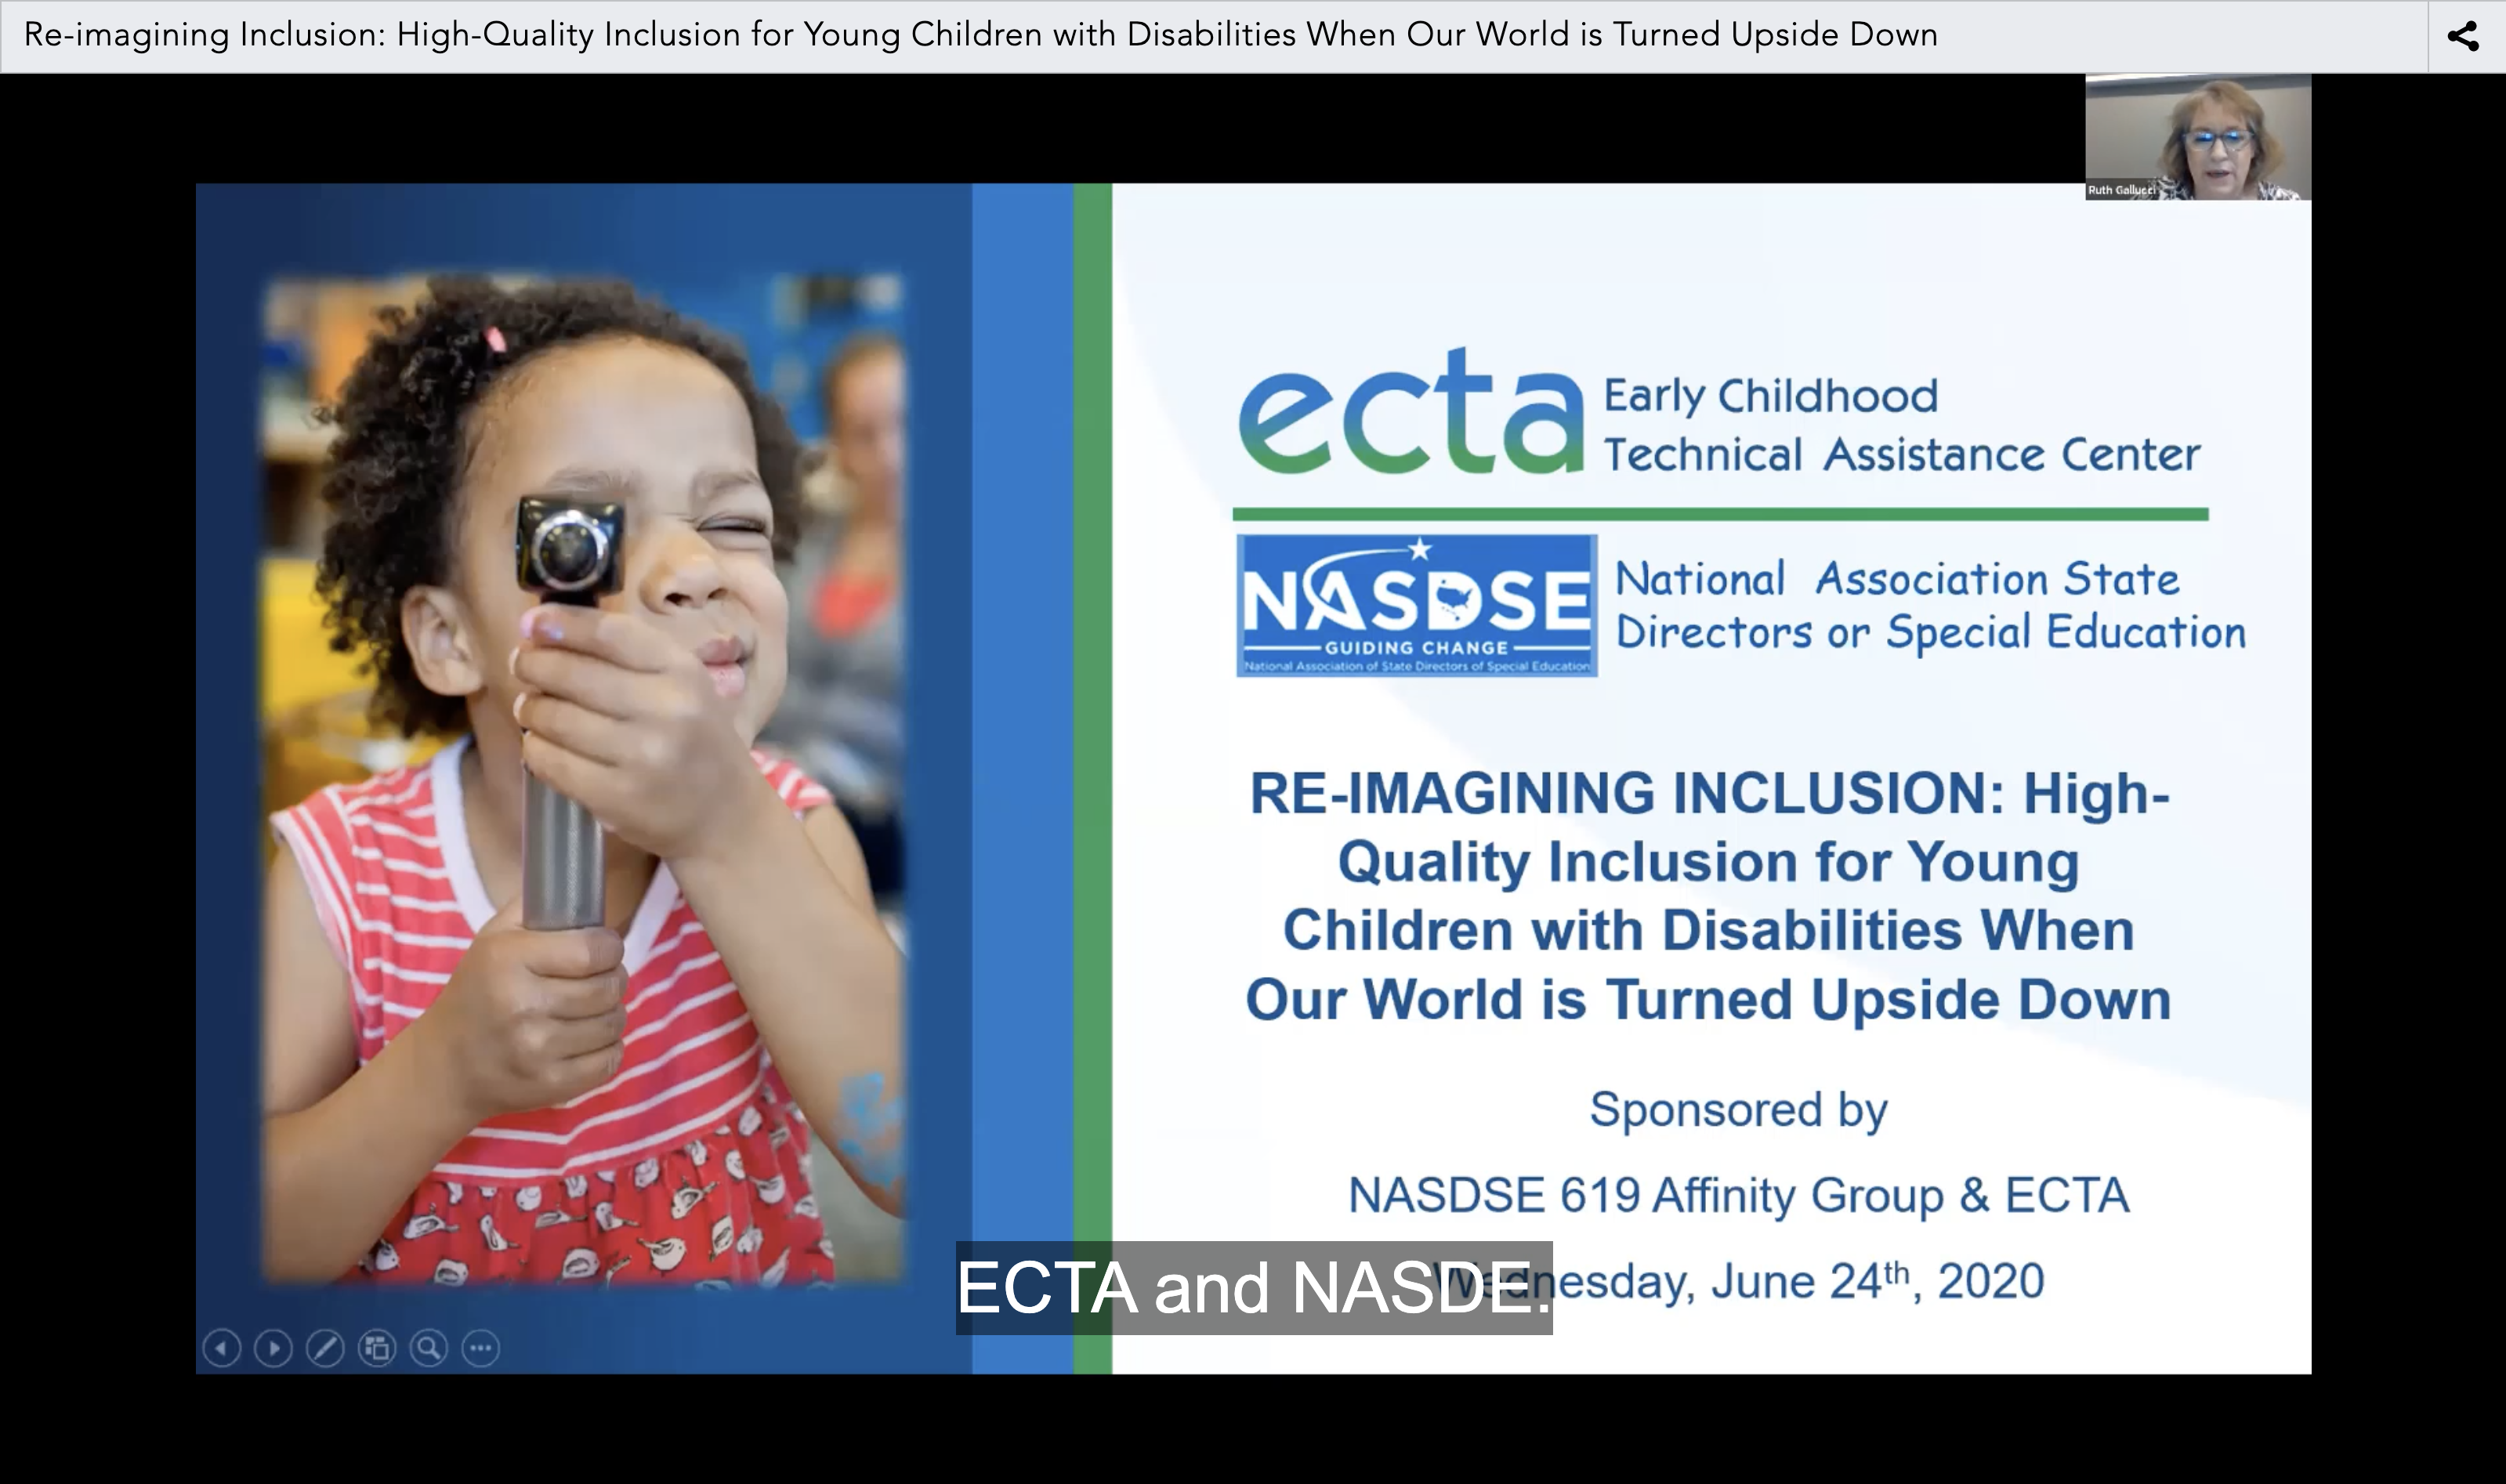 Re-Imagining Inclusion: High-Quality Inclusion for Young Children with Disabilities When the World Turns Upside Down